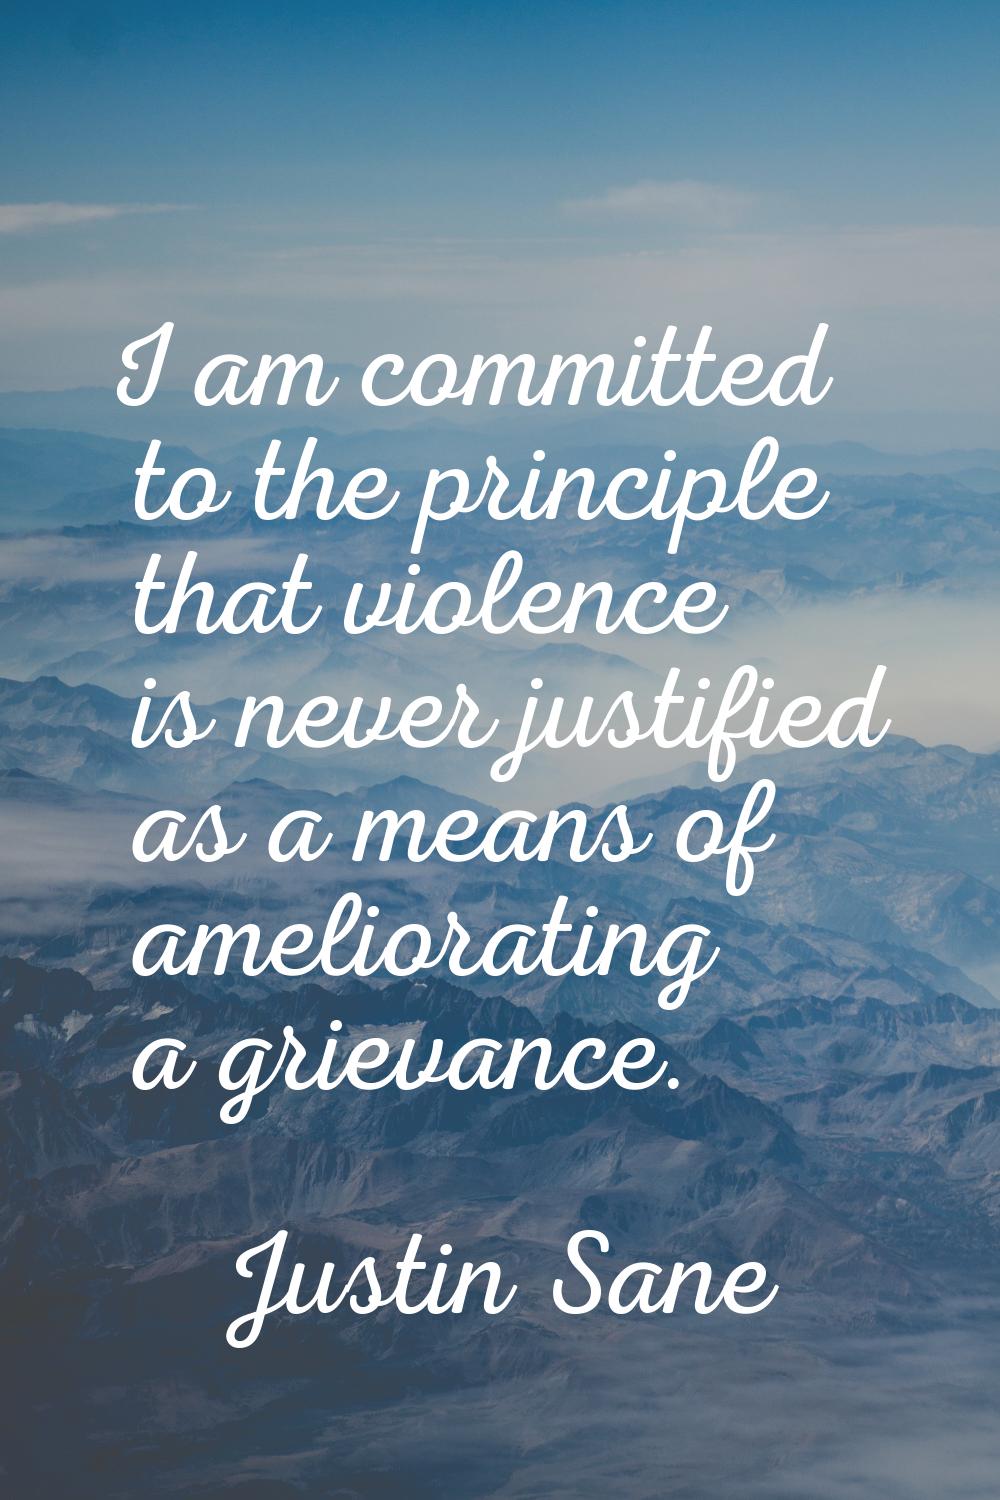 I am committed to the principle that violence is never justified as a means of ameliorating a griev